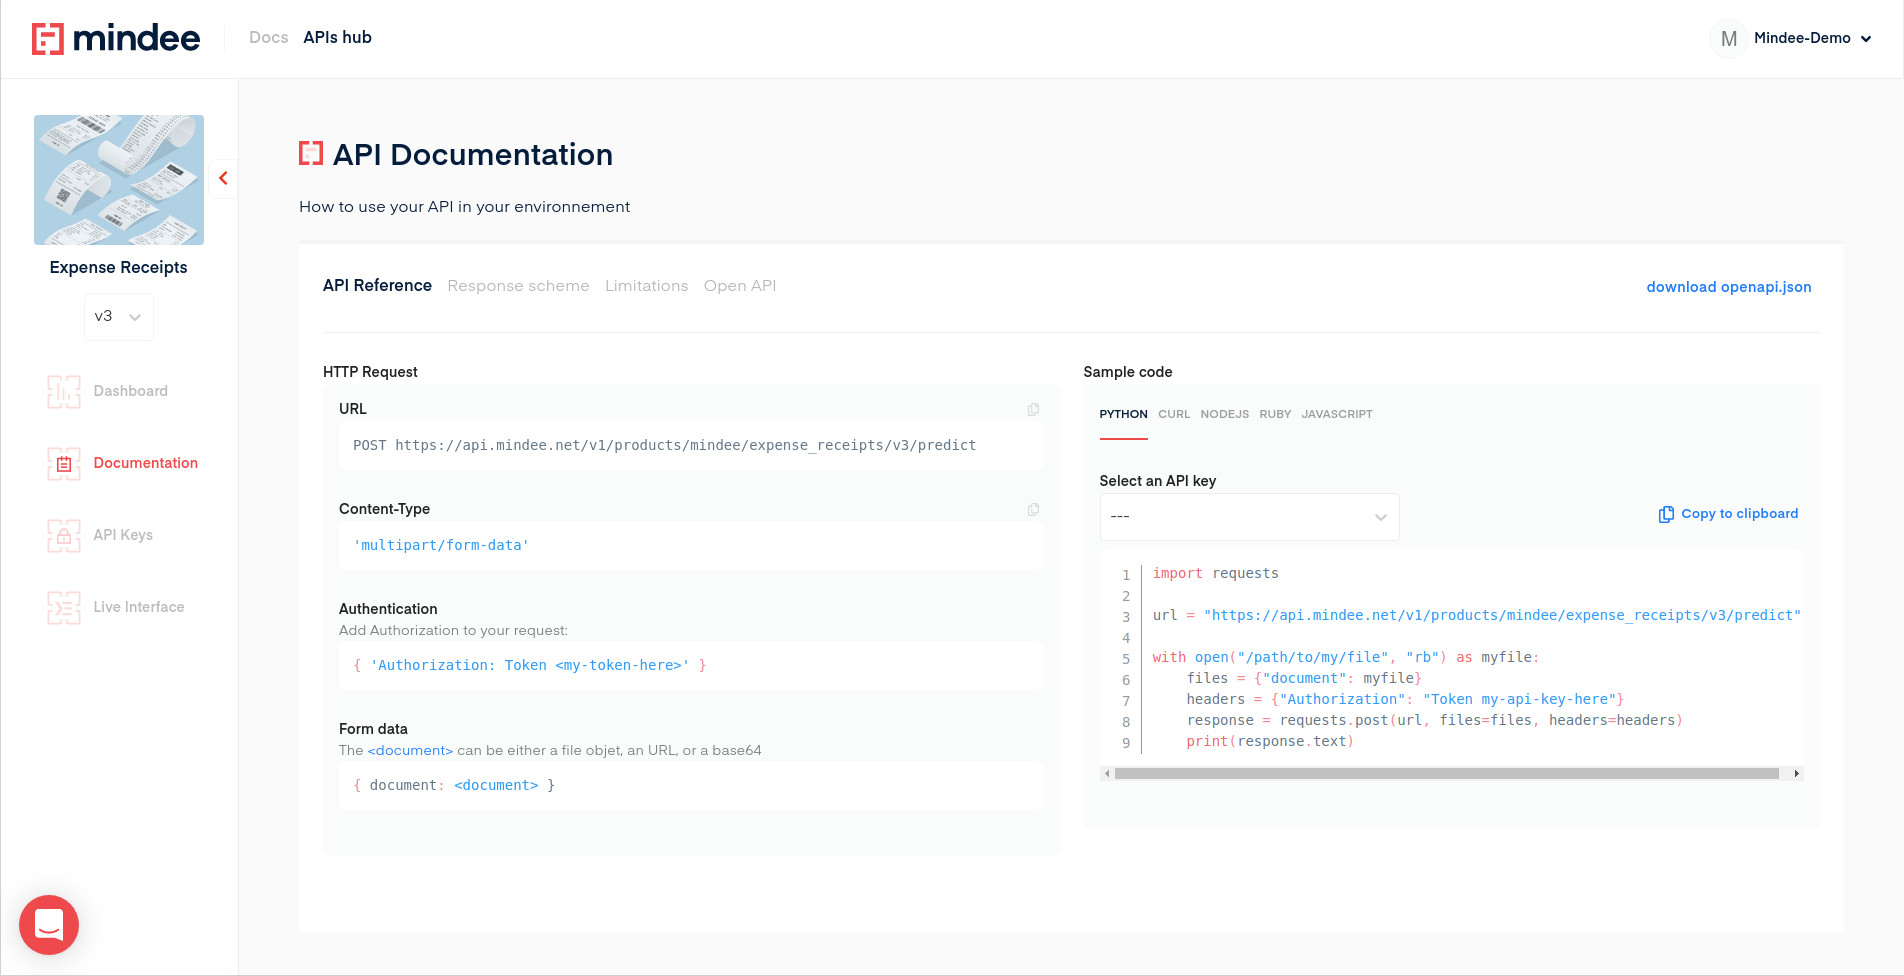 Mindee APIs documentation with the different section